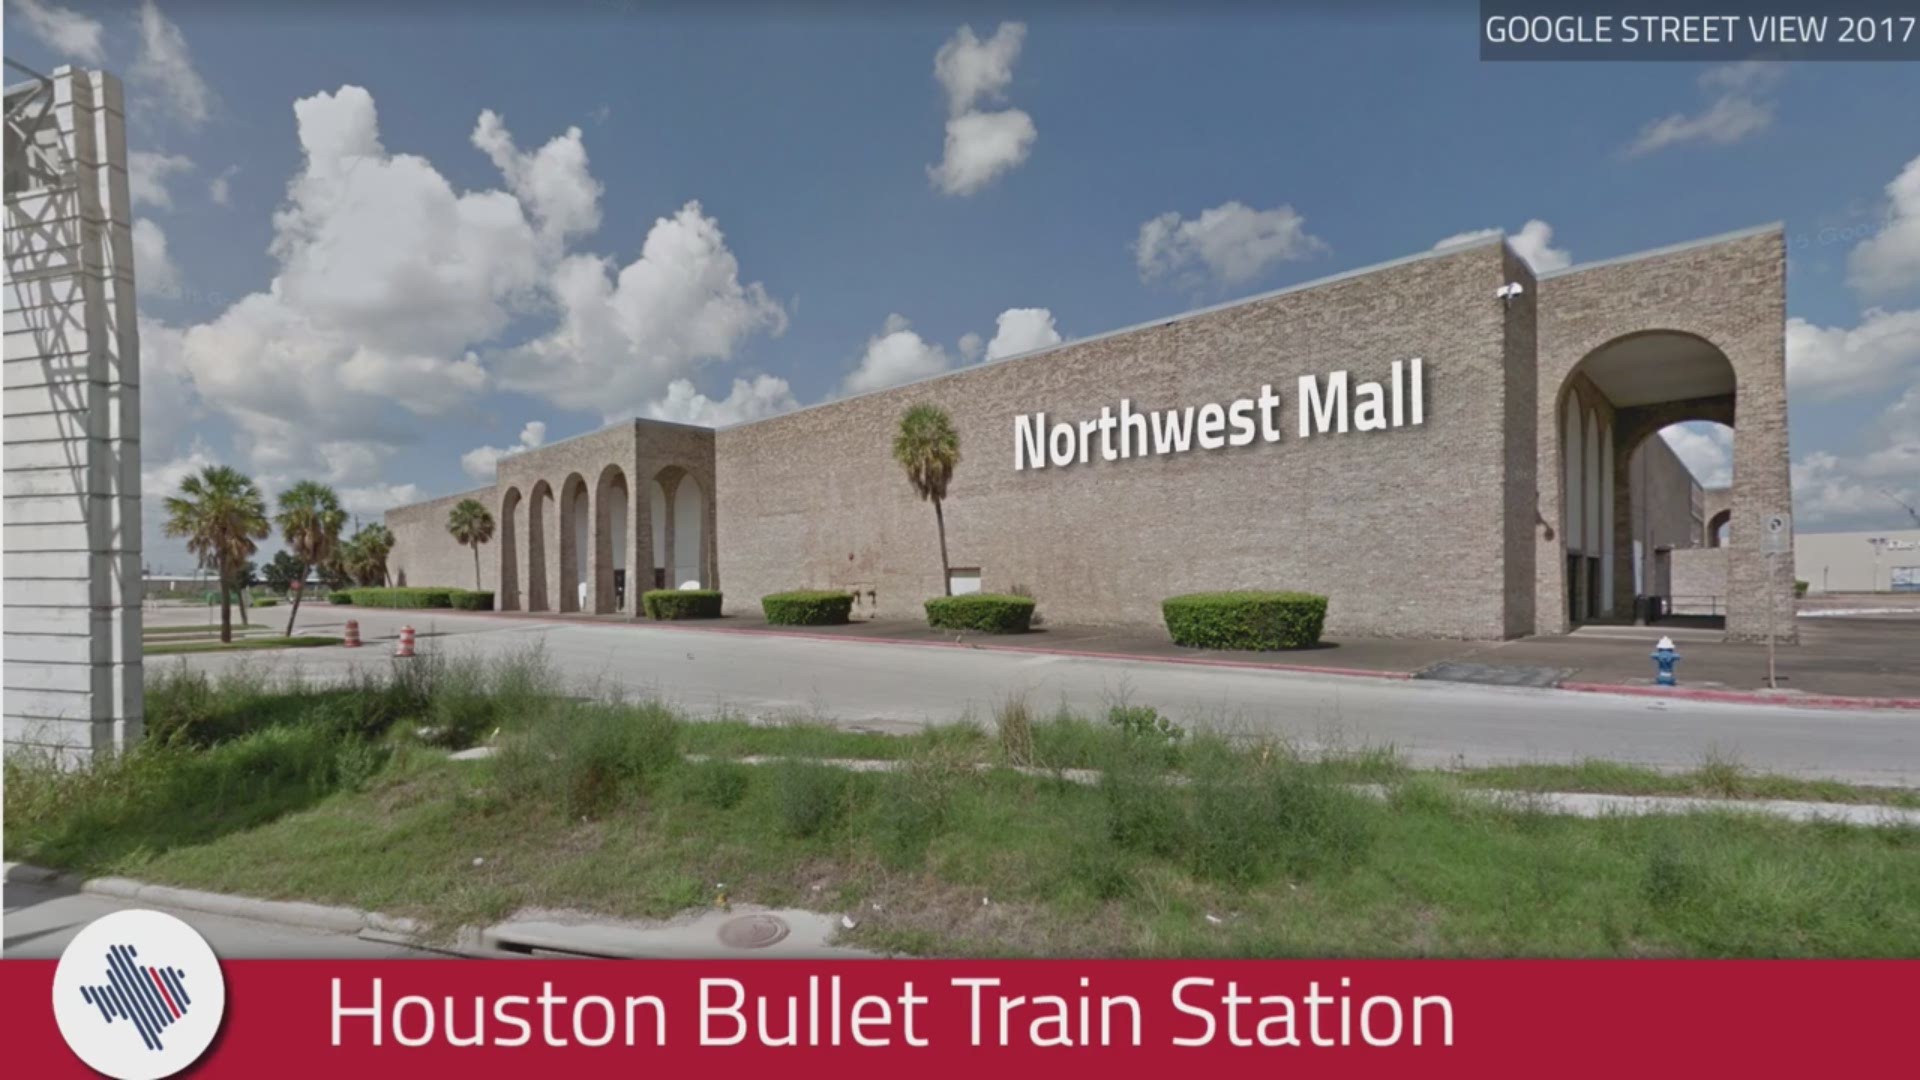 The Texas Bullet Train has announced the preferred location for its Houston passenger station, at the Northwest Mall site near the interchange of US 290 and Interstate 610 ' Credit: Texas Central